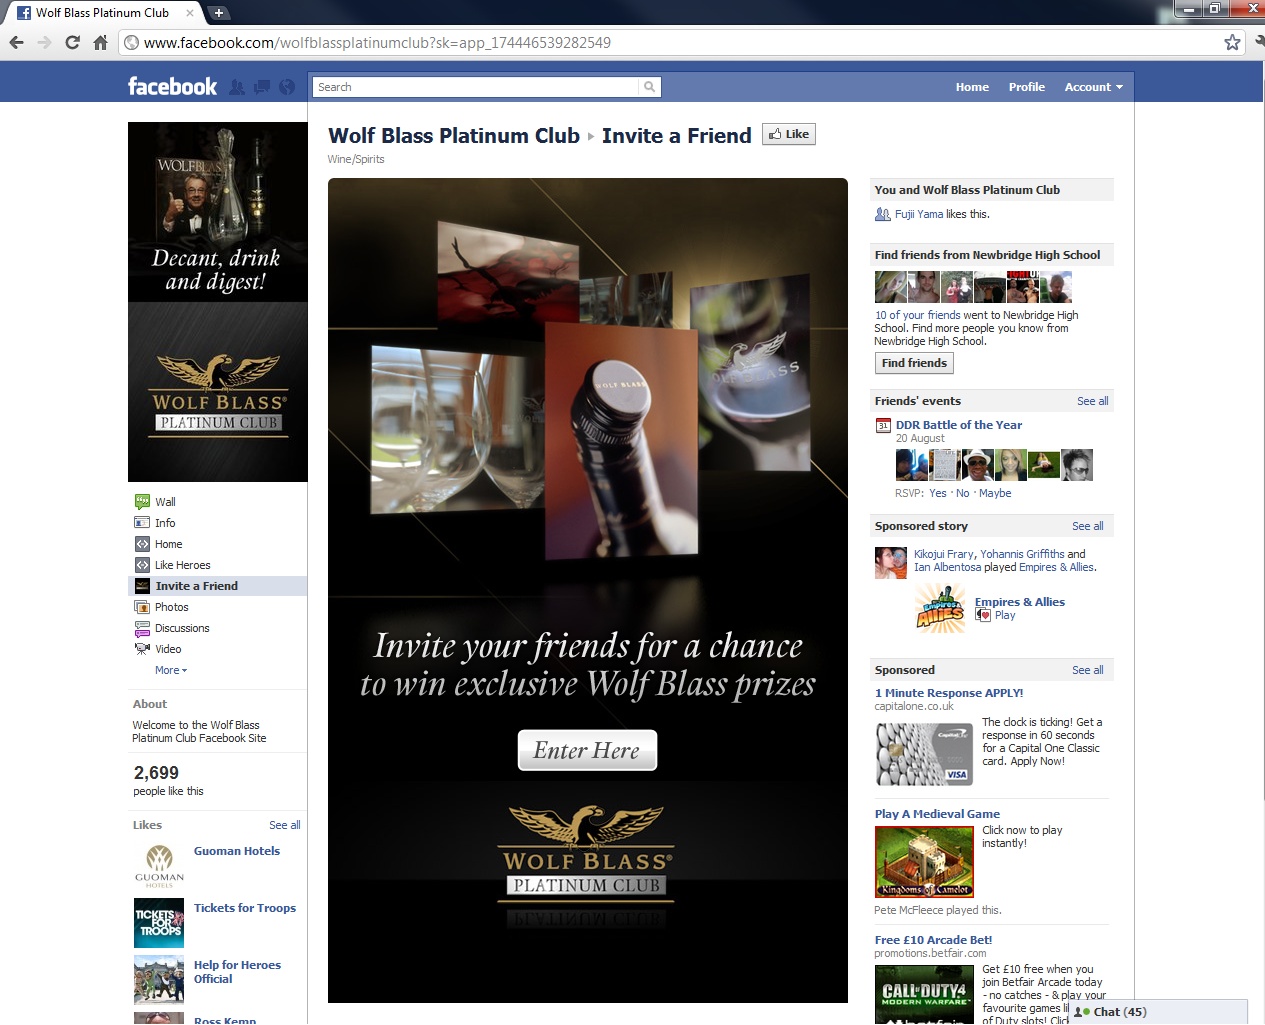 The landing page for the WolfBlass invite a friend Facebook Application